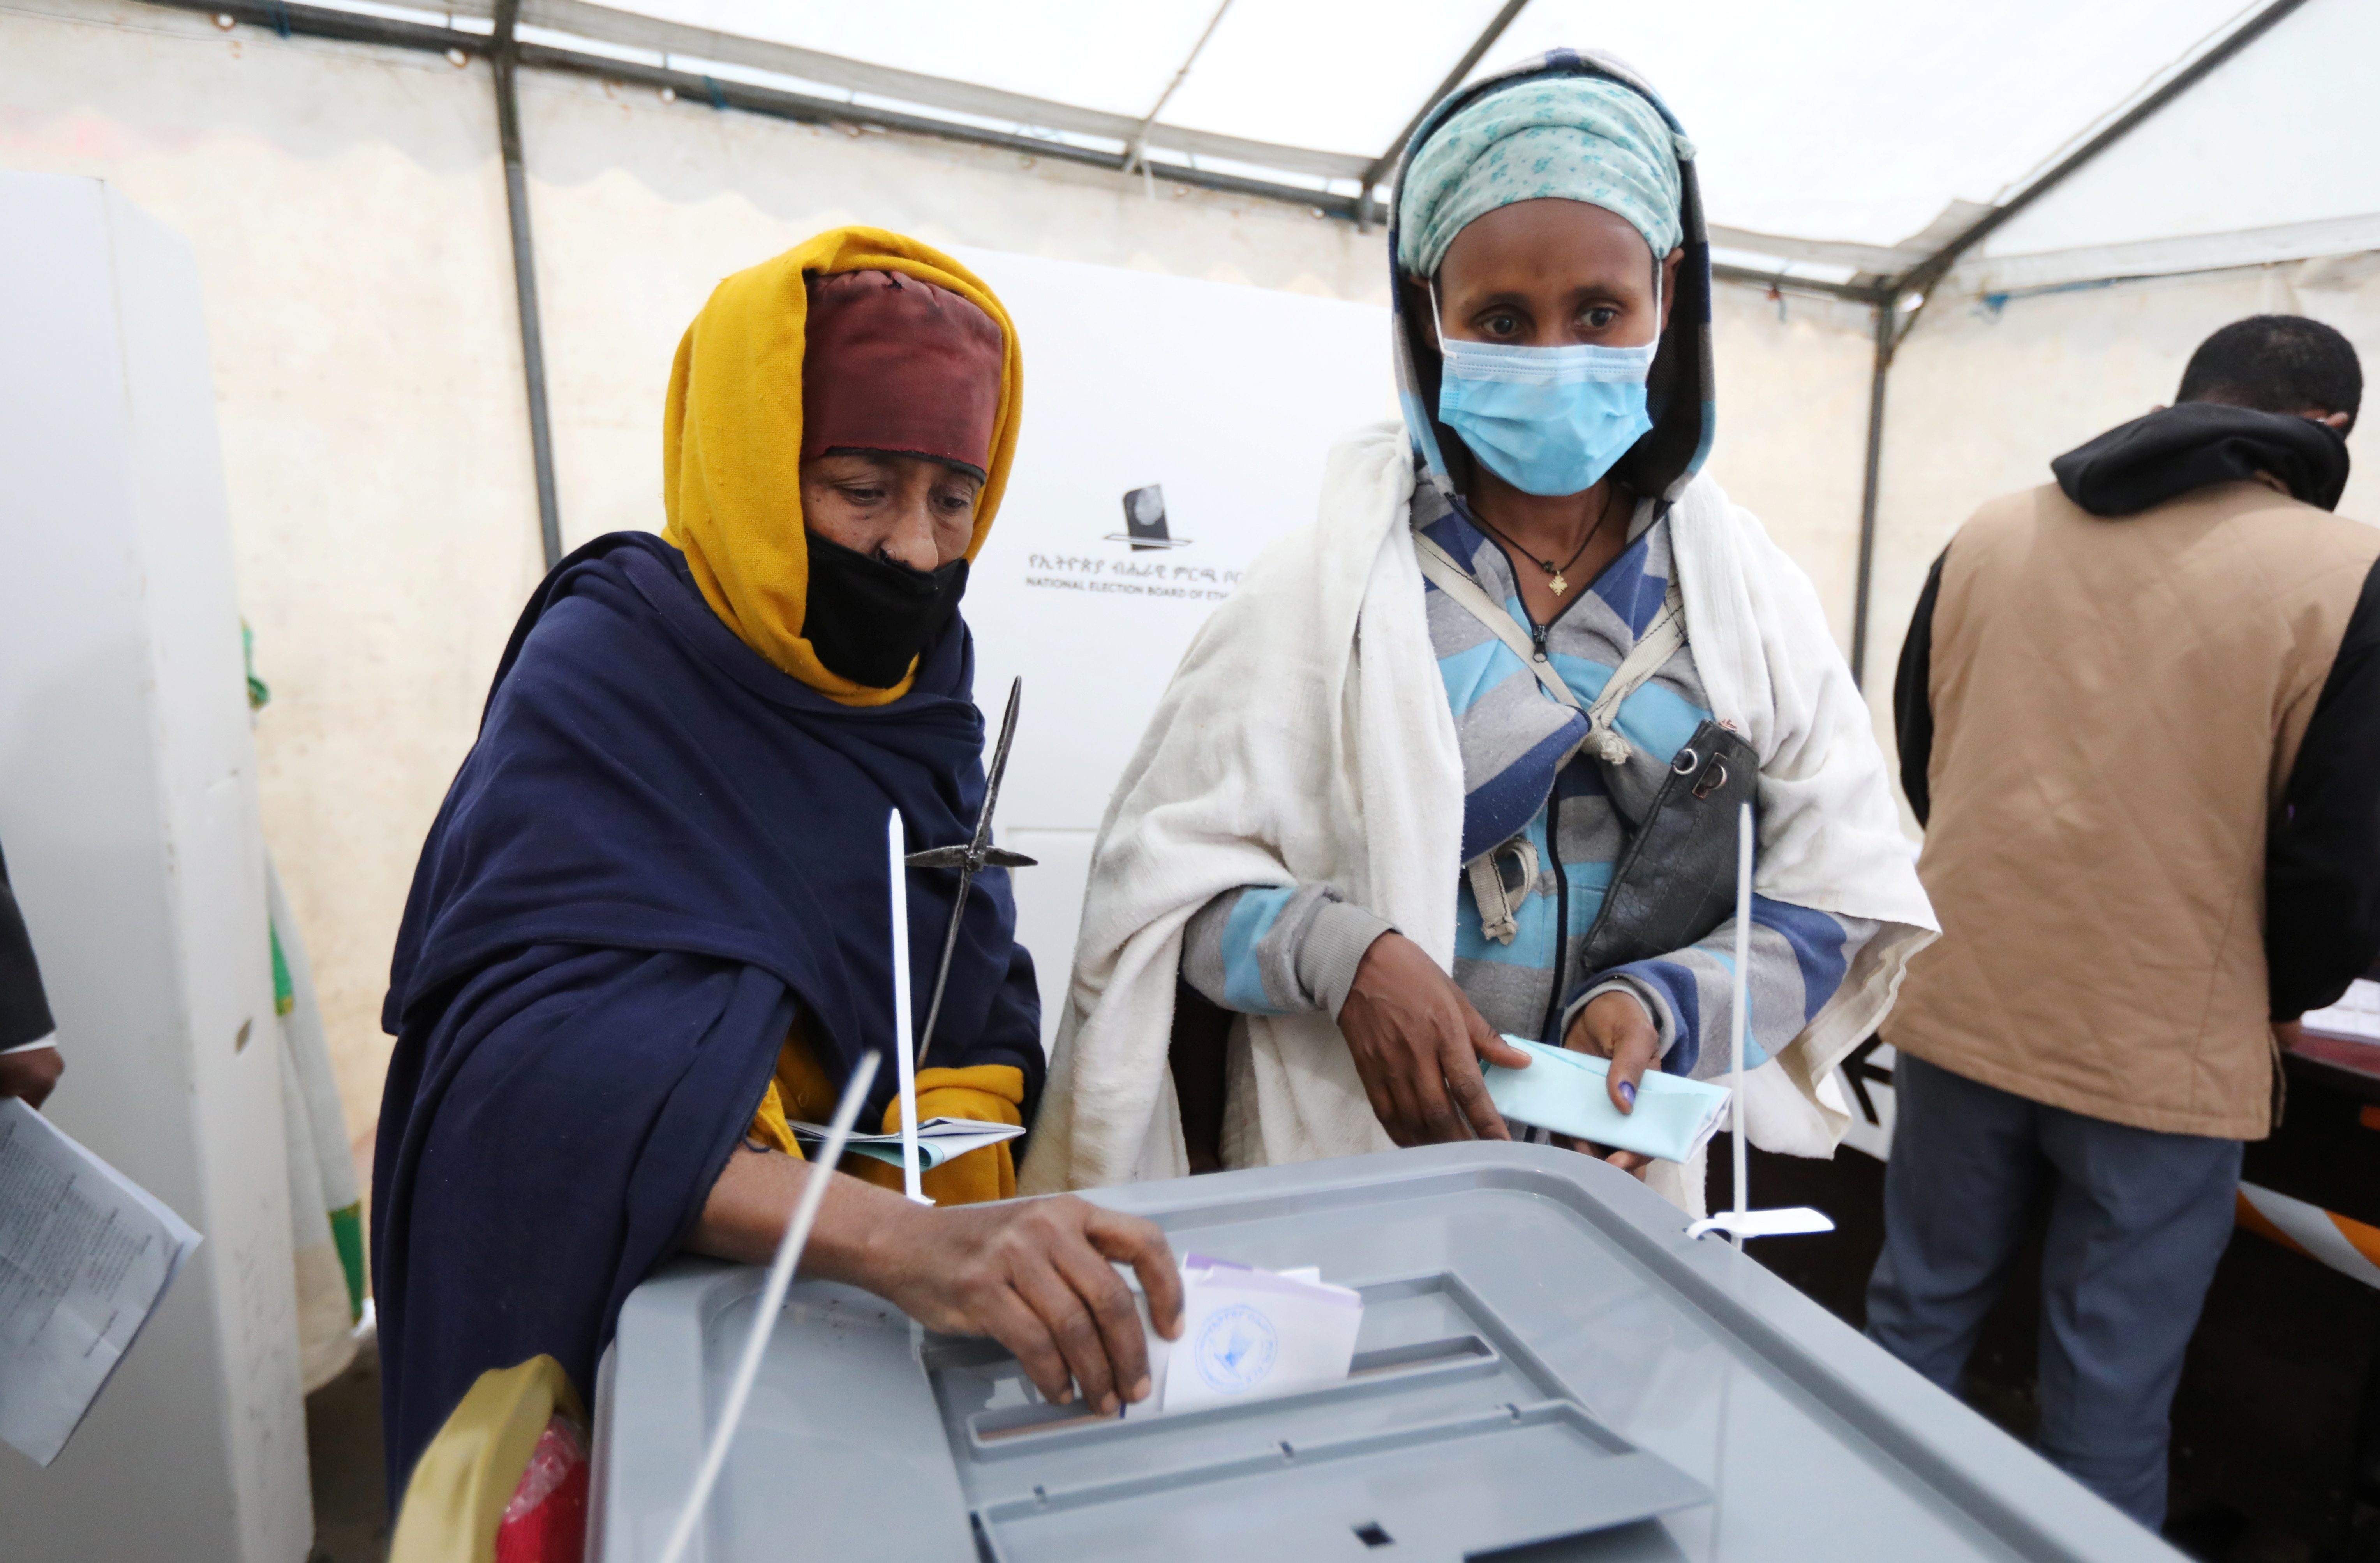 Ethiopians to vote in what government bills as first free election